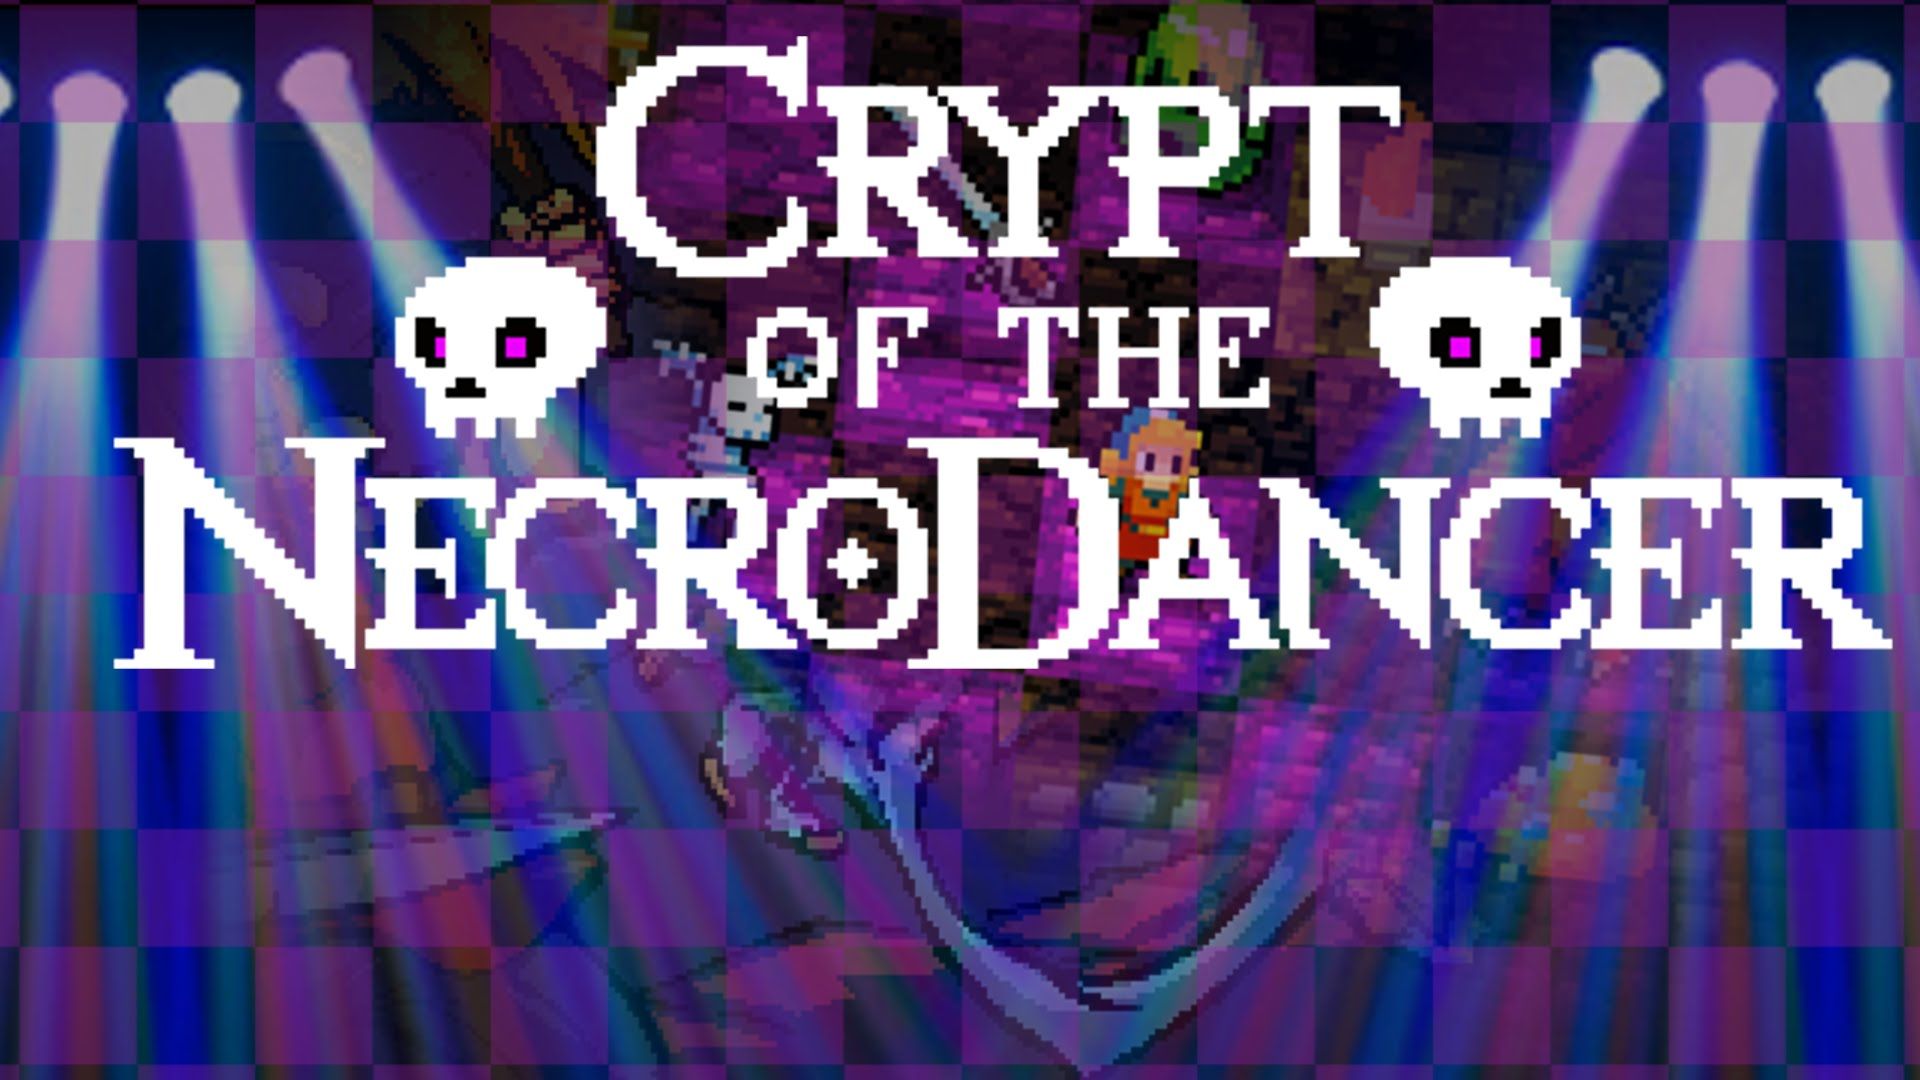 crypt of the necrodancer amplified free download